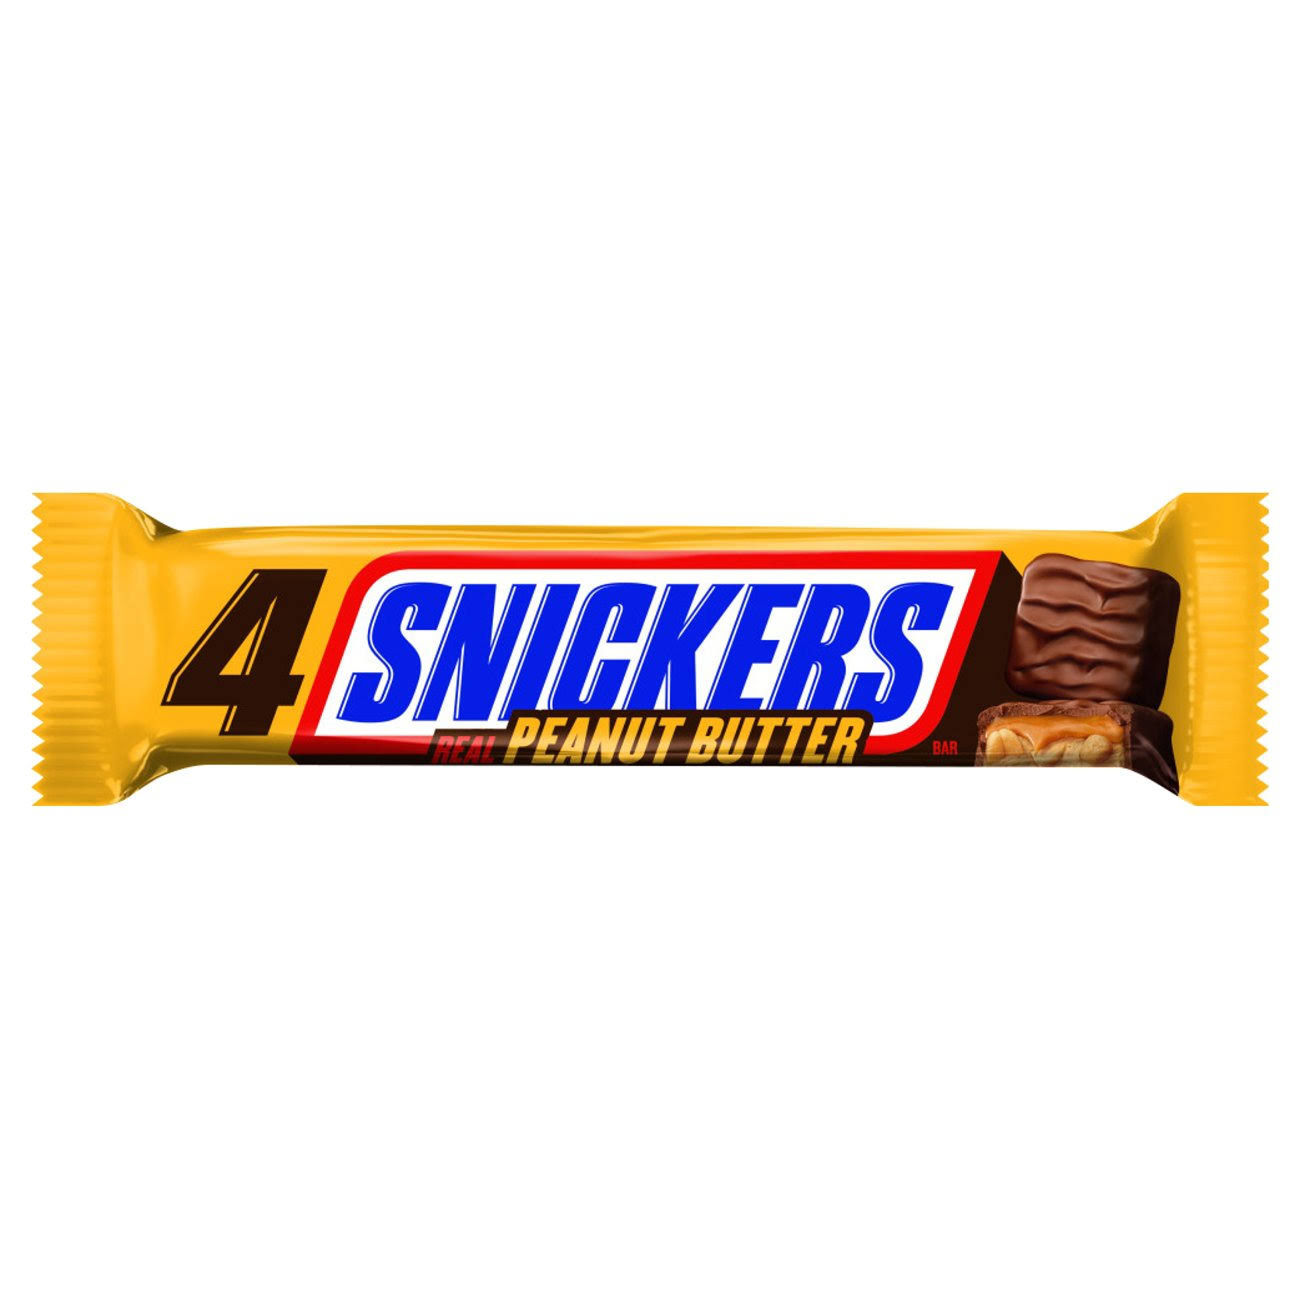 Snickers Snickers Peanut Butter King - 3.56oz, Pack of 18